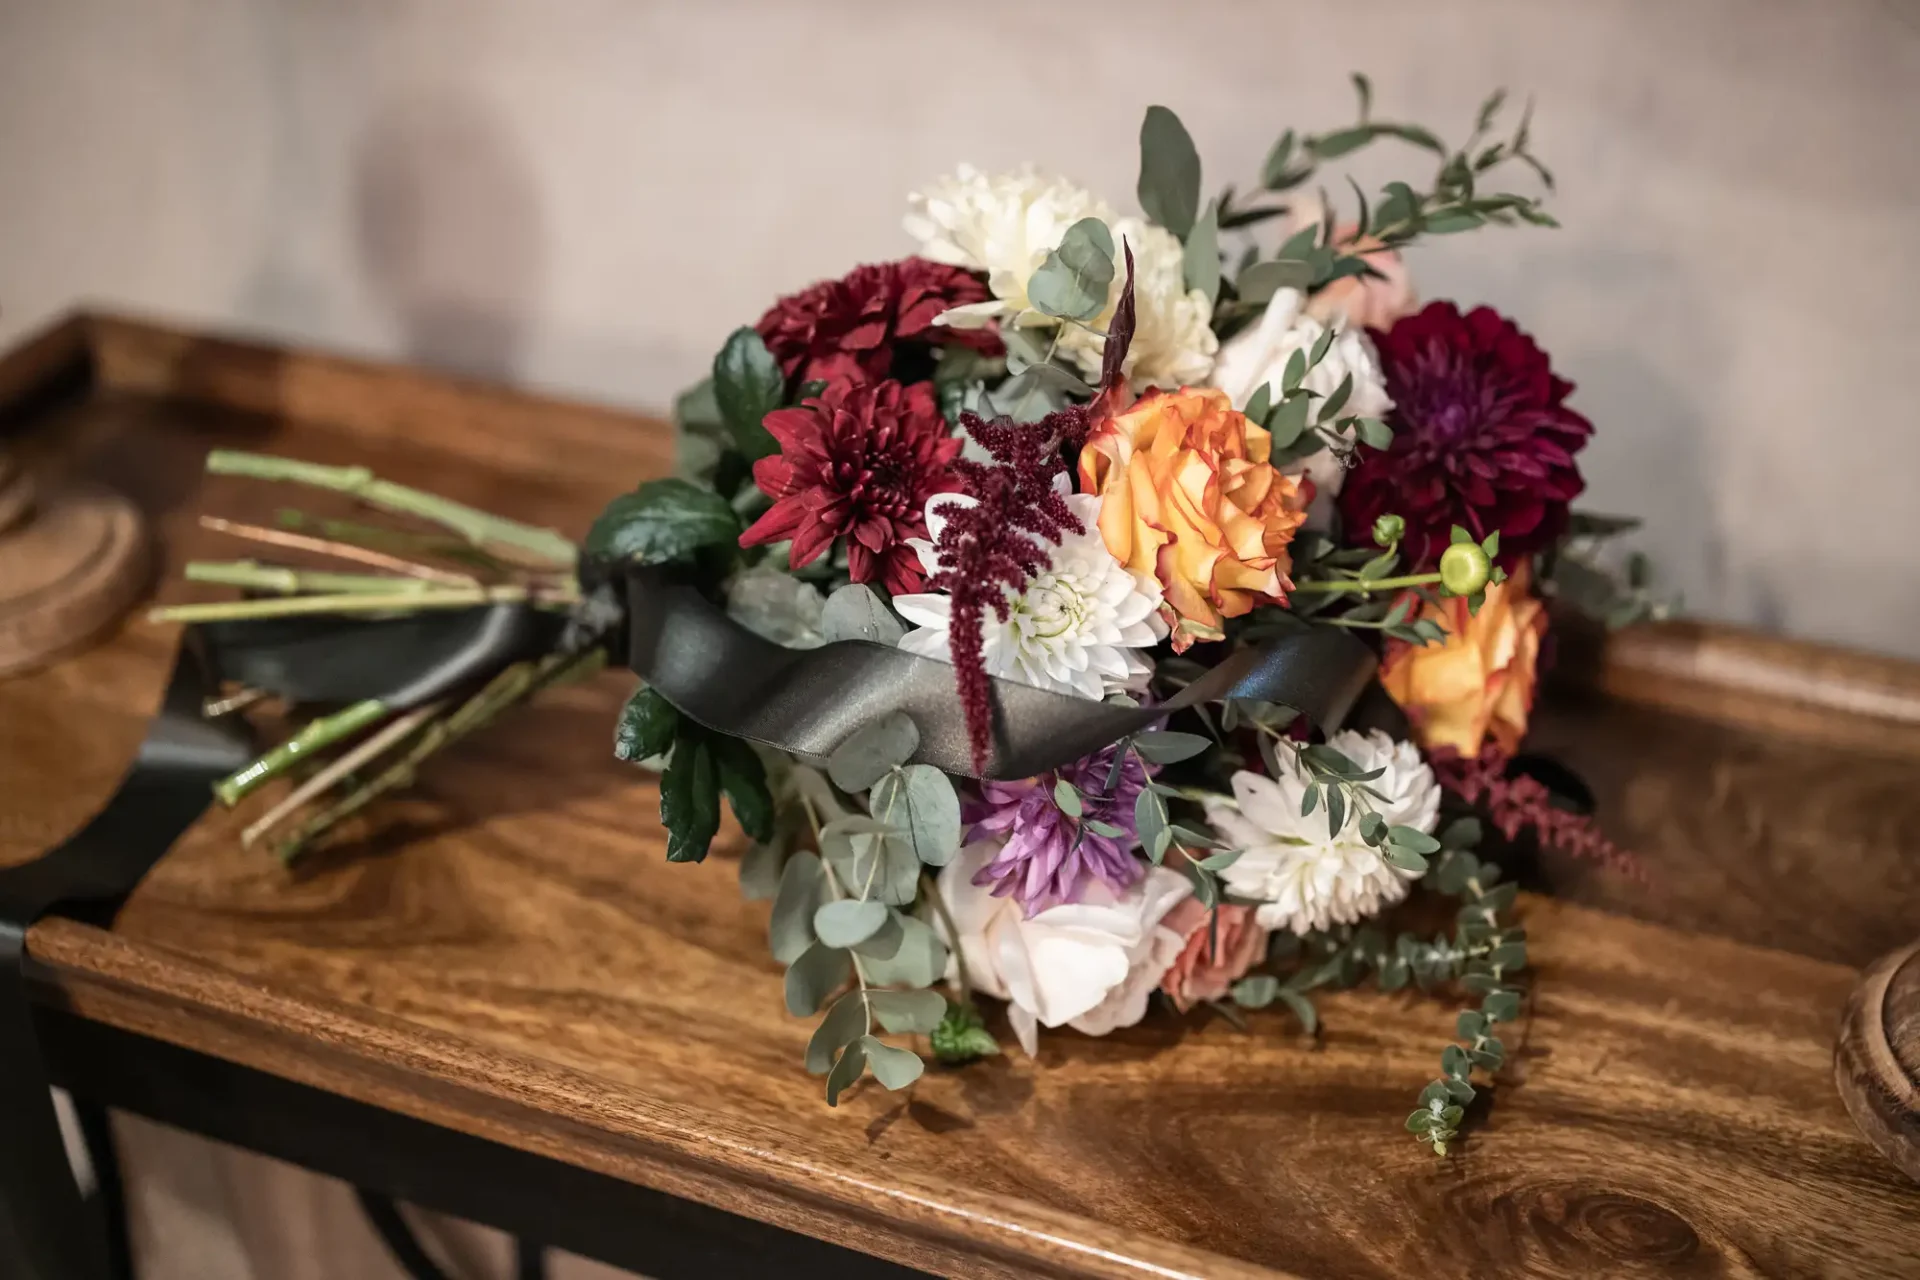 A mixed floral bouquet with dark red, orange, white, and pink flowers, accented with green foliage and a black ribbon, resting on a wooden surface.